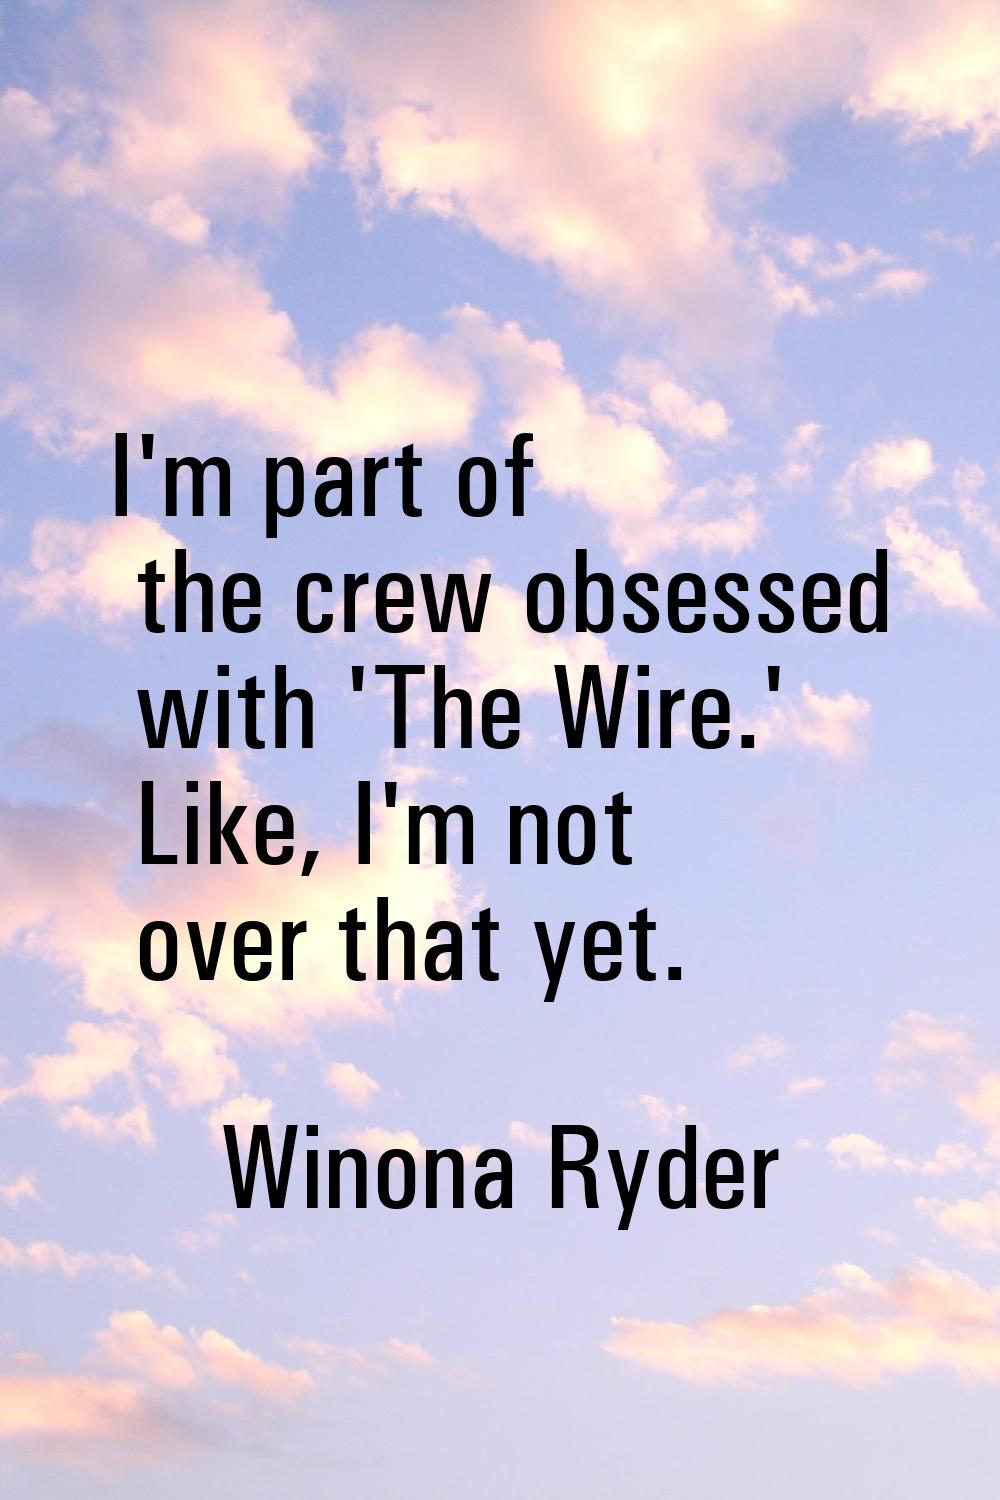 I'm part of the crew obsessed with 'The Wire.' Like, I'm not over that yet.